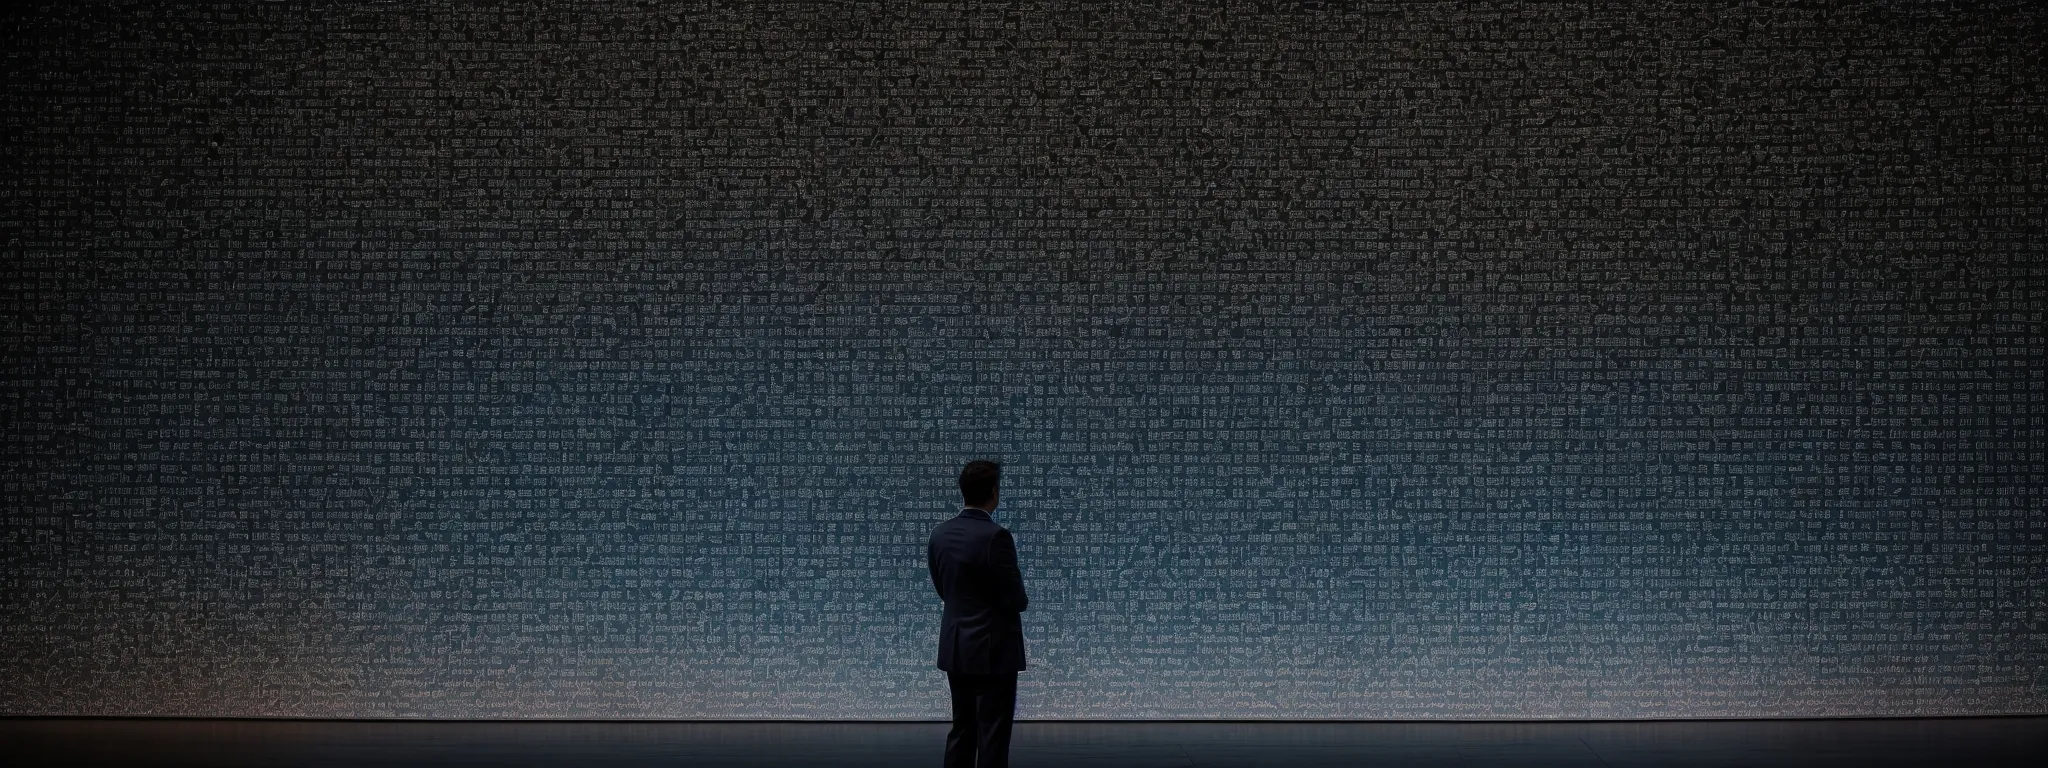 john mueller stands before a large screen displaying intricate data patterns, symbolizing the sophistication behind google's algorithm updates.